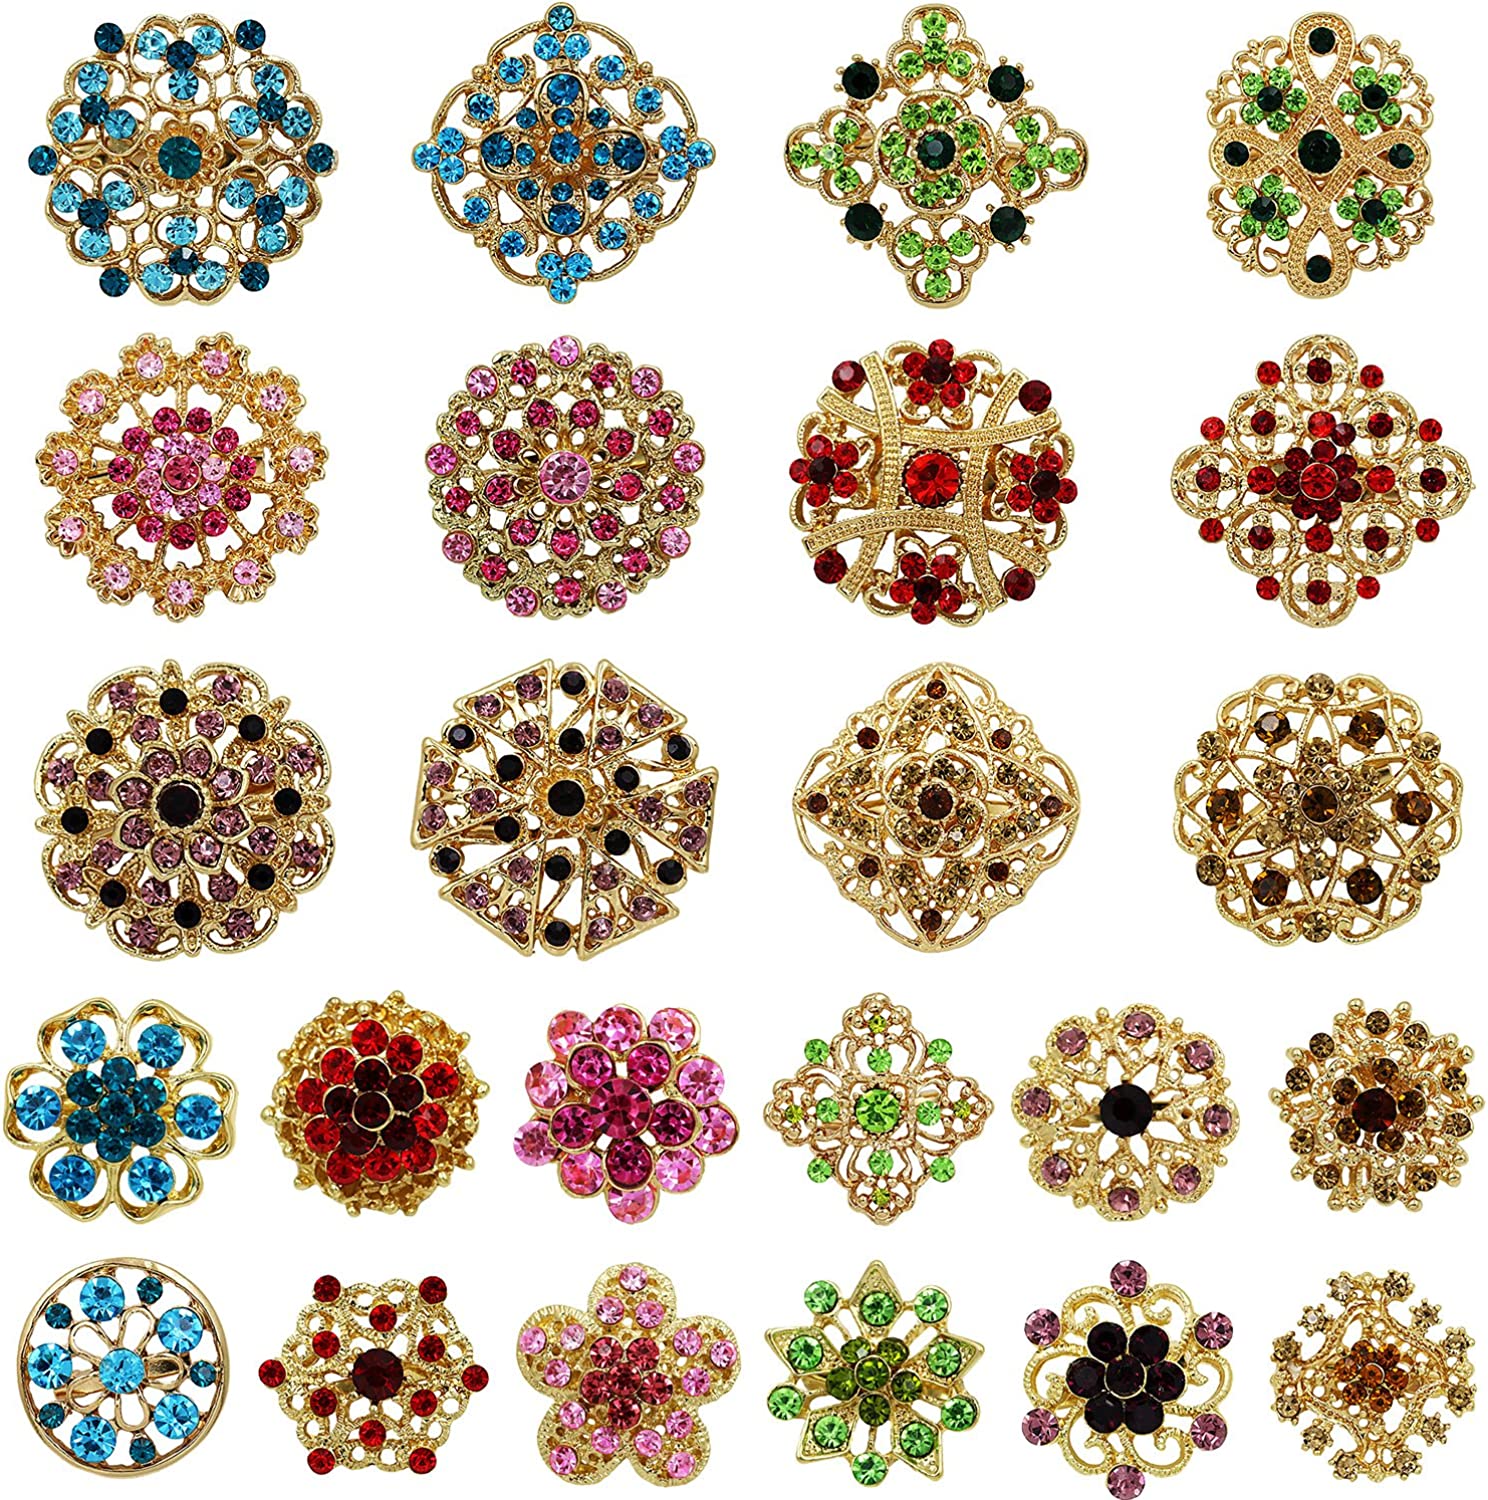 Lot 24pc Mixed Color Rhinestone Crystal Flower Brooches Pins